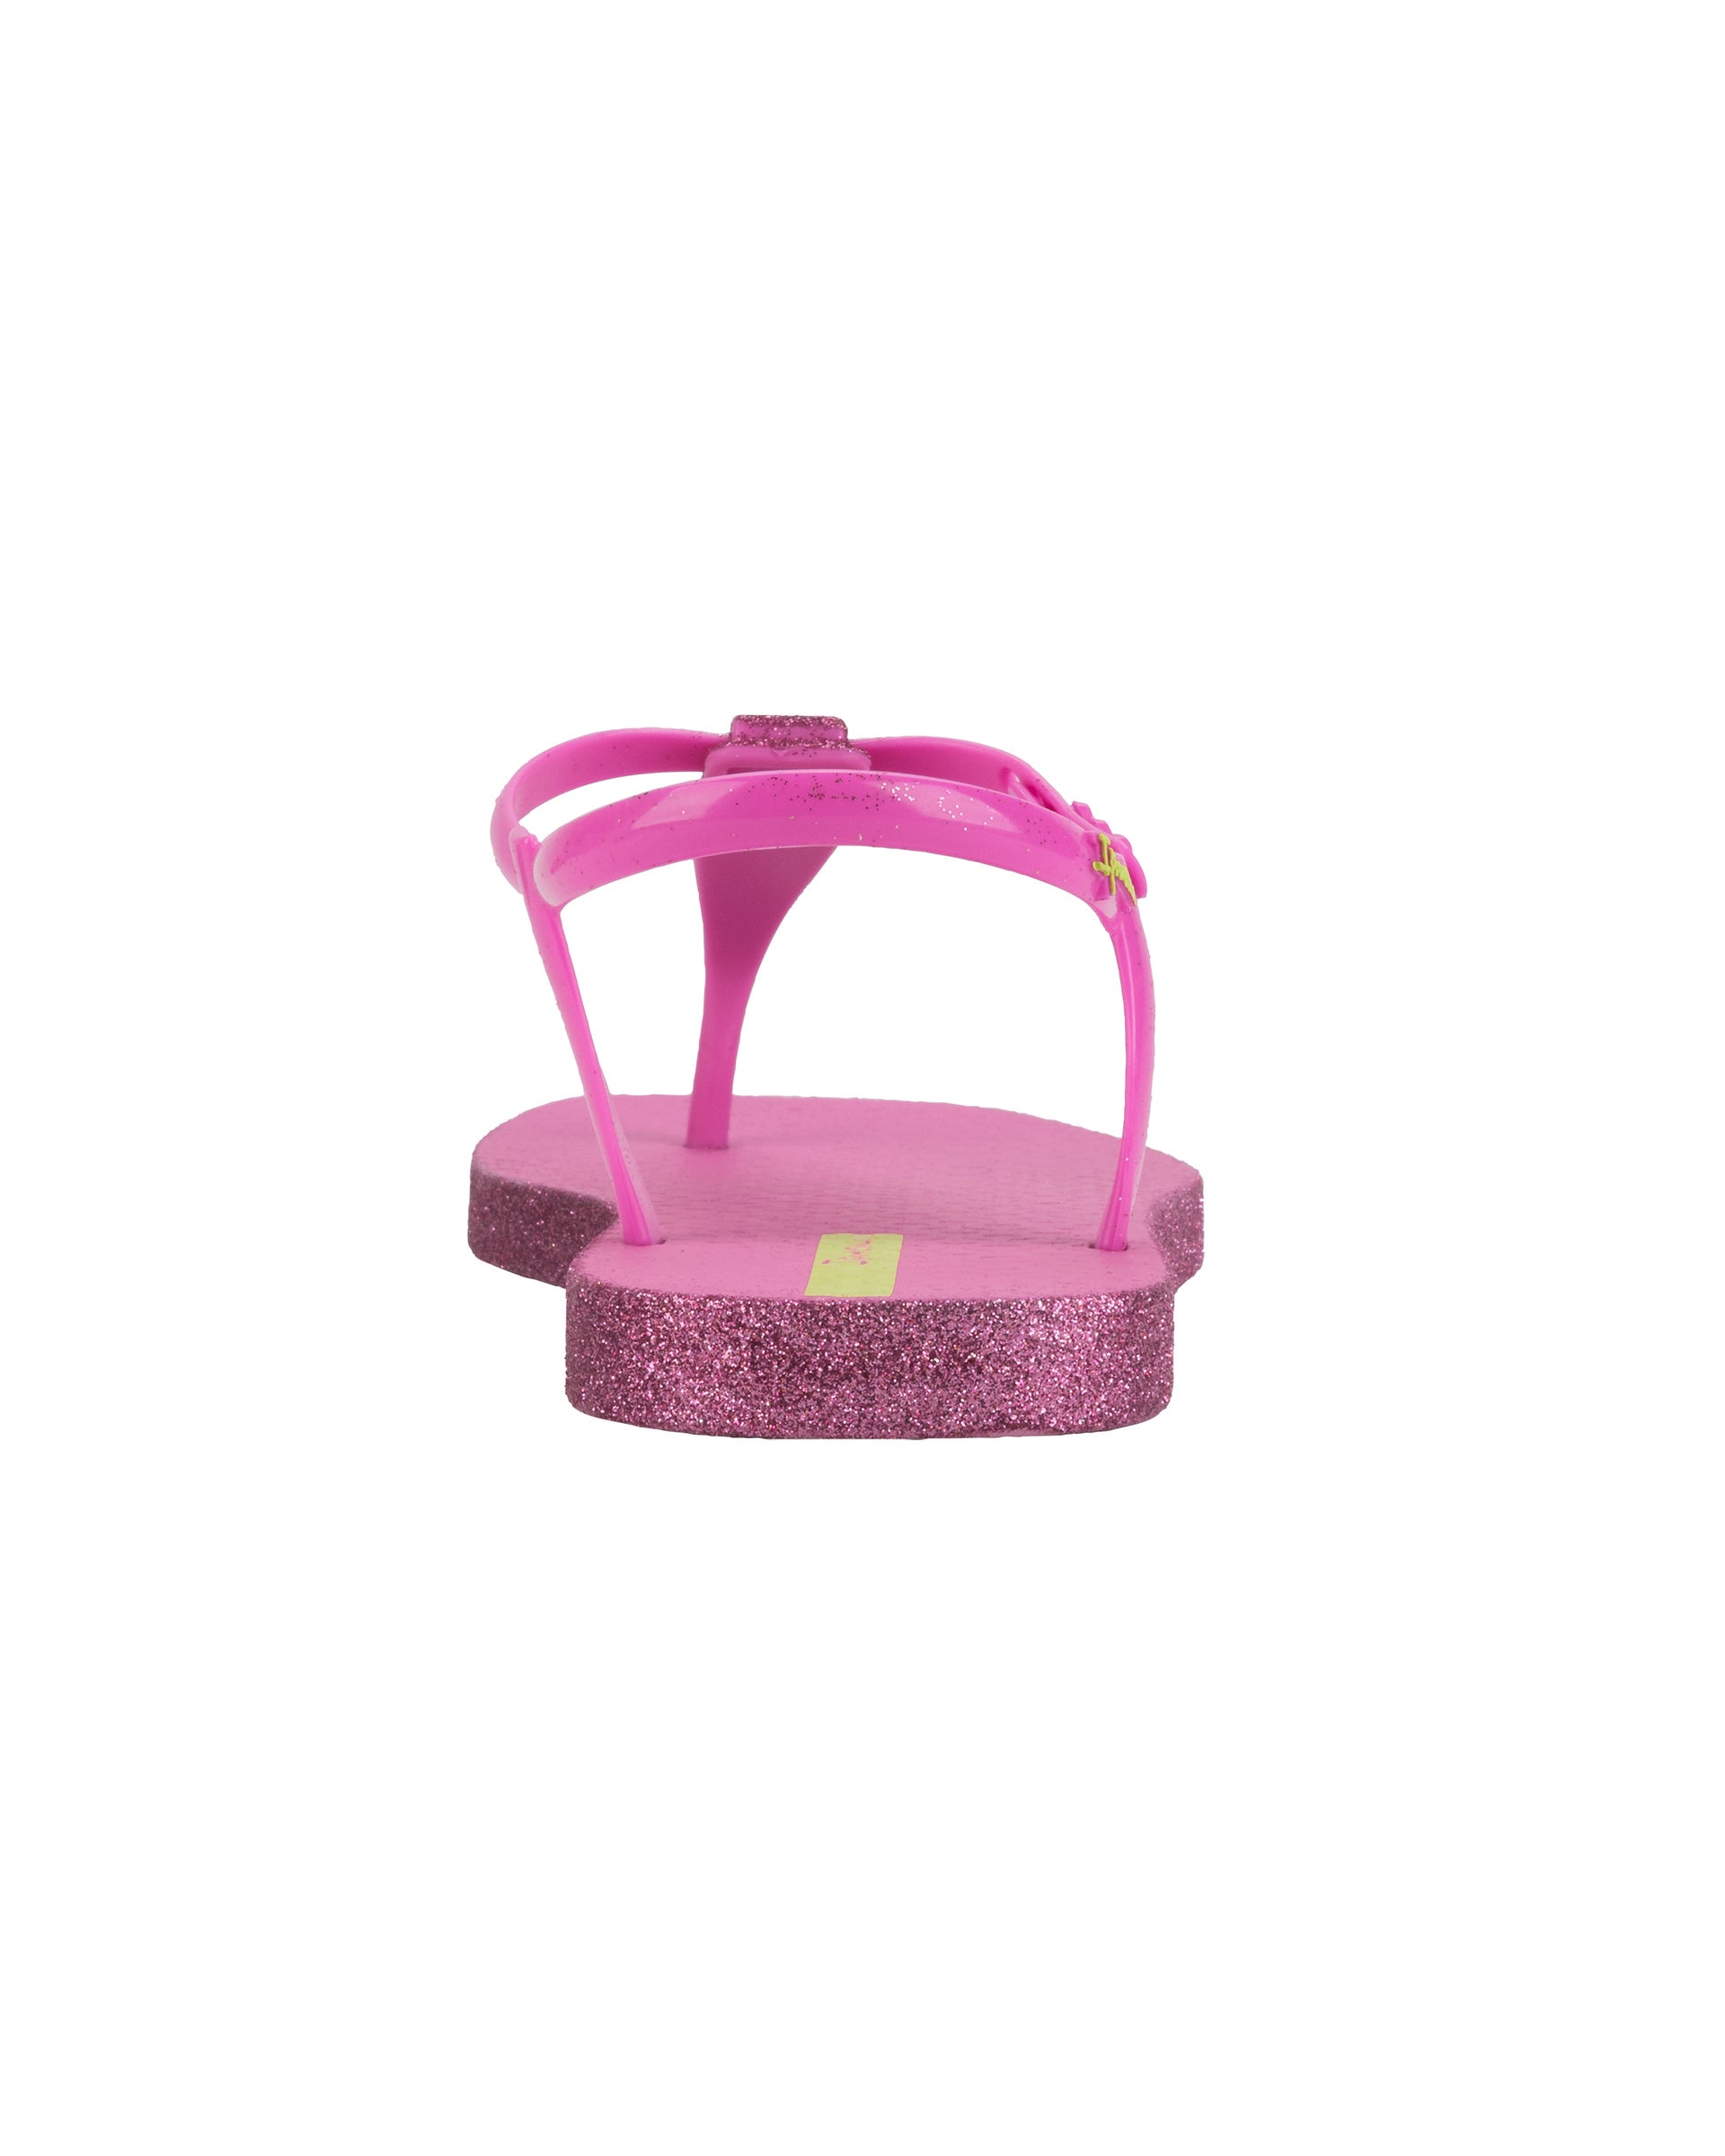 Back view of a pink Ipanema Class Edge Glow t-strap women's sandal with glitter pink thong.